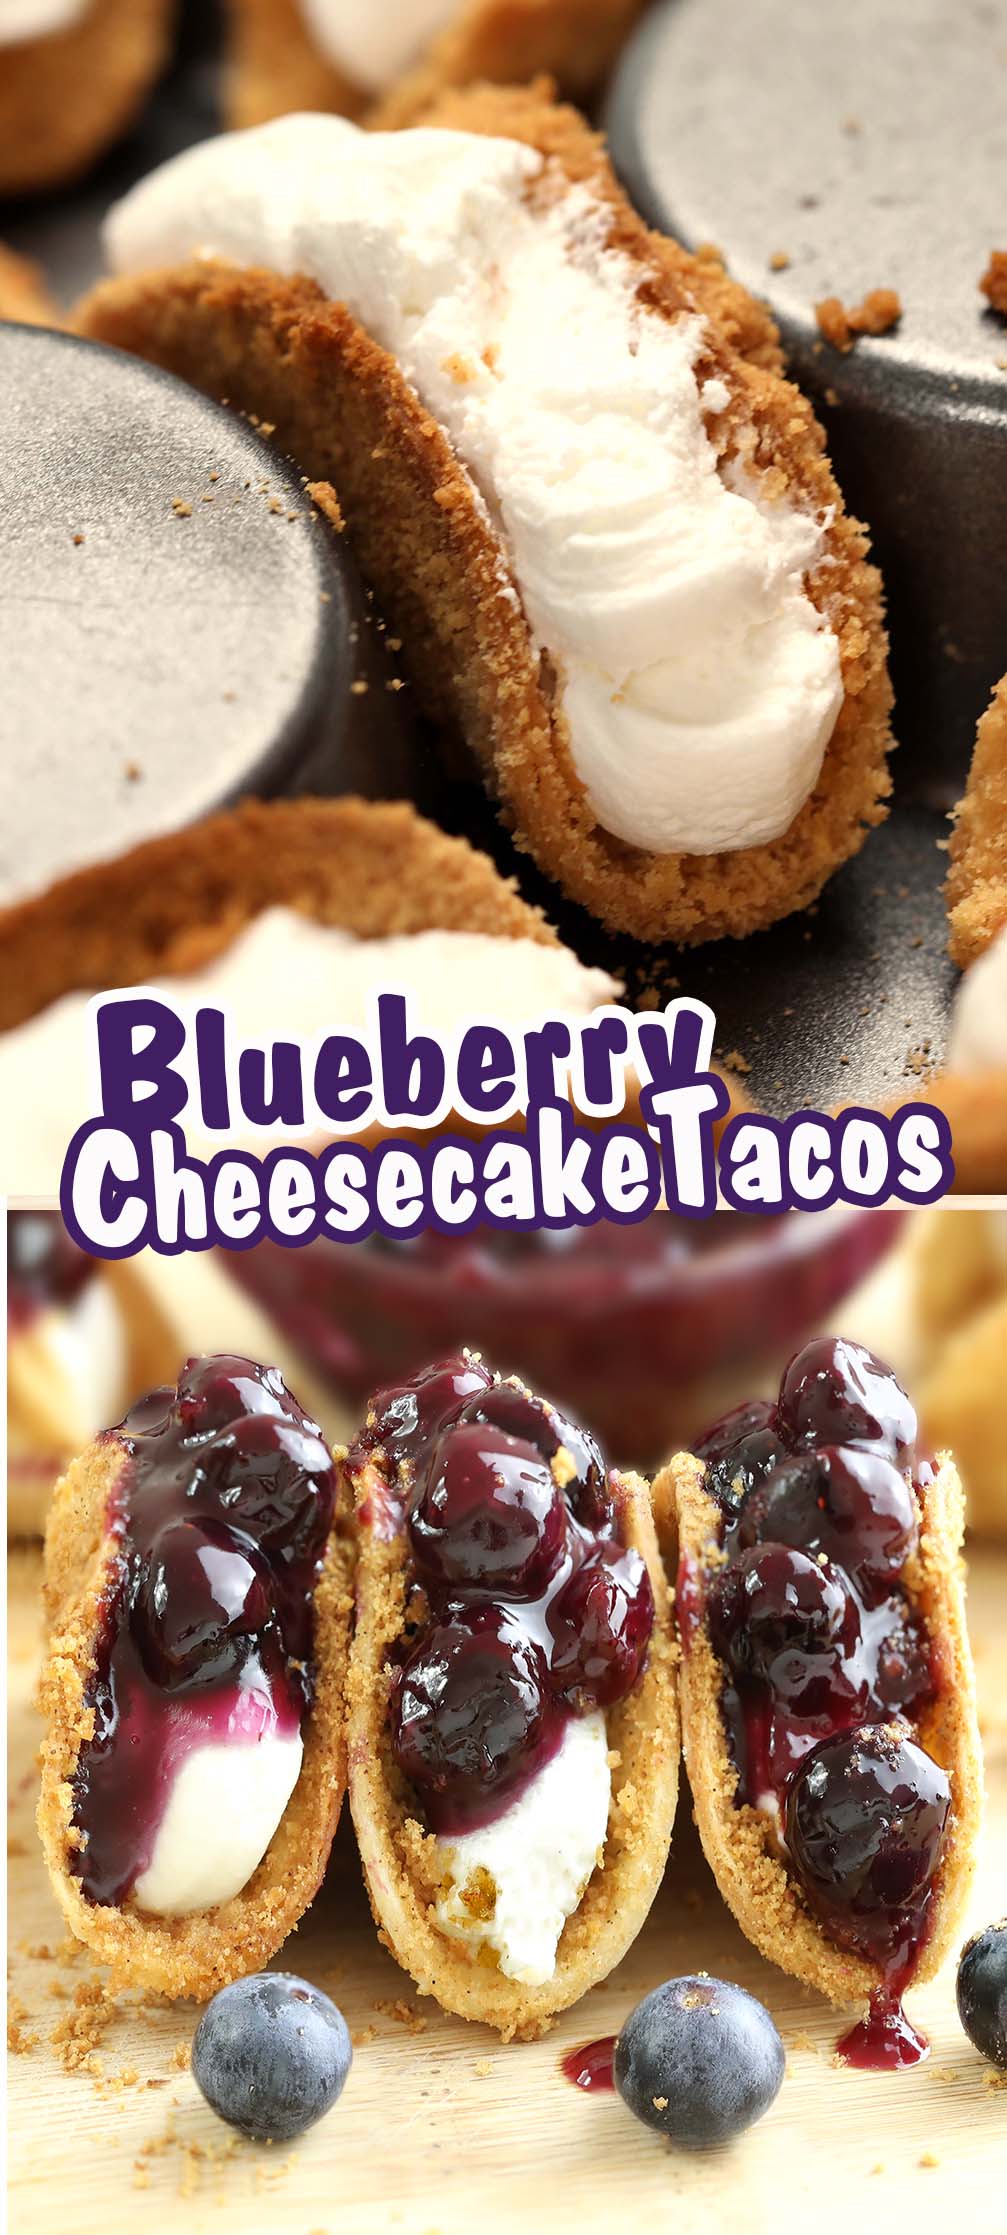 The perfect treat to bring as a party pleaser, and they couldn’t be easier. Crunchy baked tortilla shells, easy cheesecake filling, and homemade blueberry pie topping are simply perfect. You’ll be enjoying this awesome dessert in about 30 minutes.